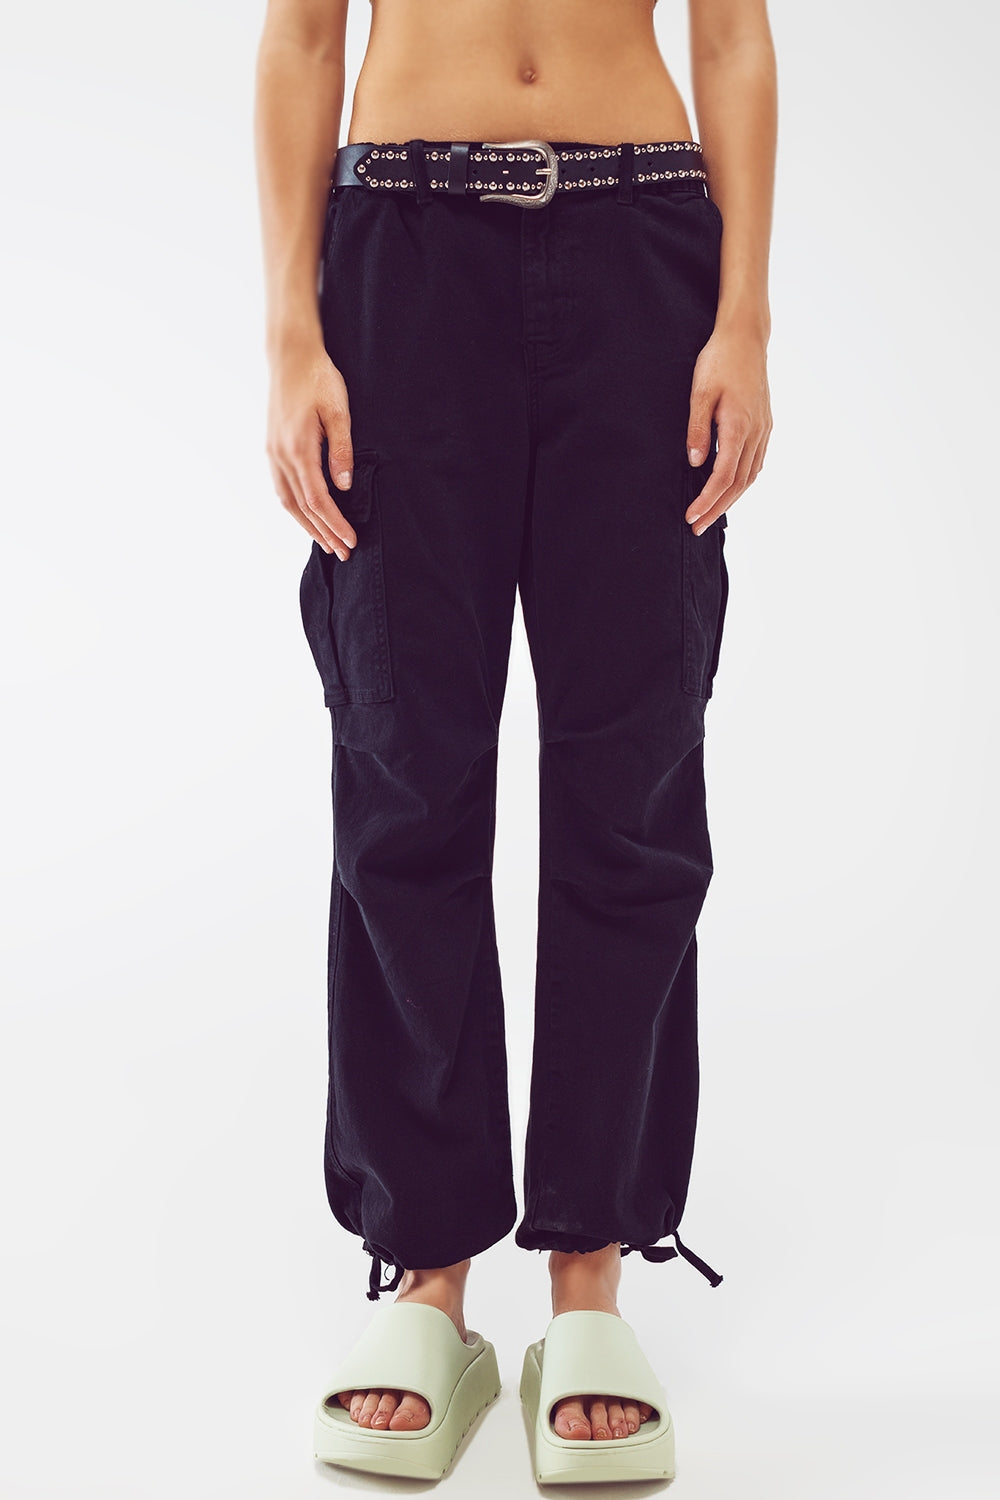 Q2 Cargo Pants with Tassel ends in black